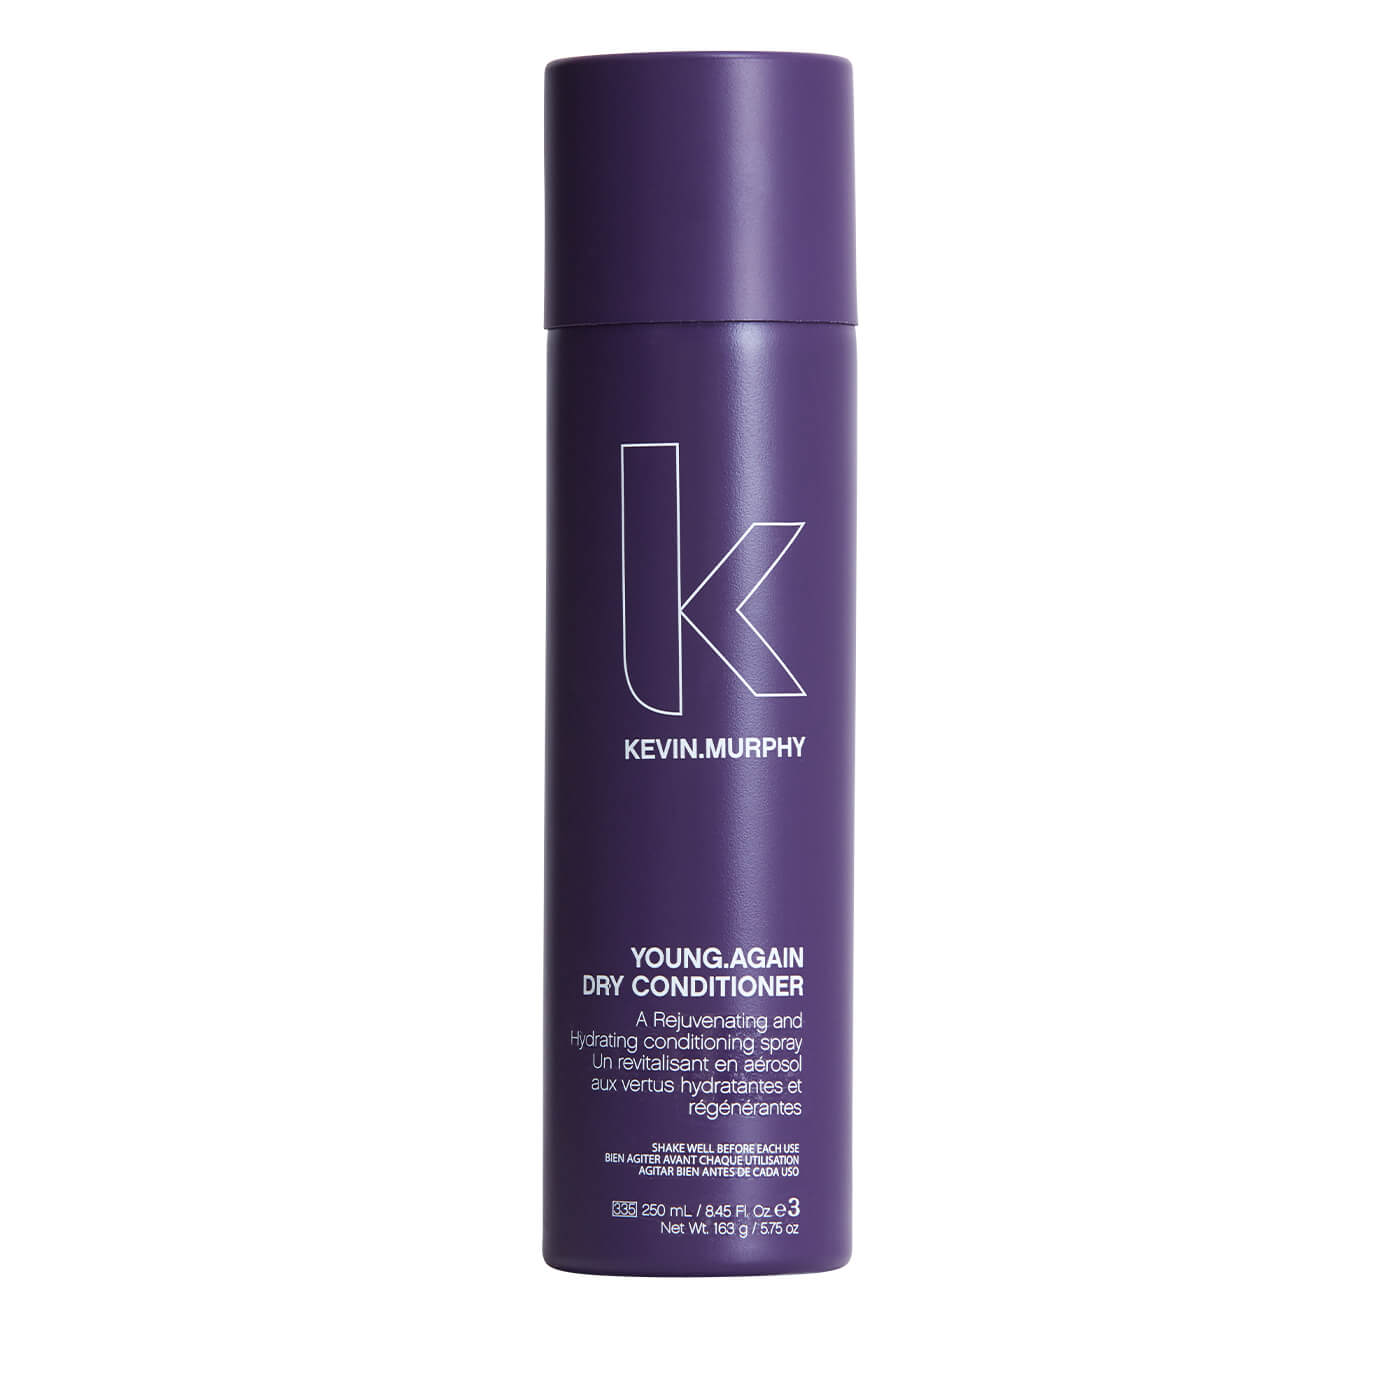 YOUNG.AGAIN DRY CONDITIONER 250ML